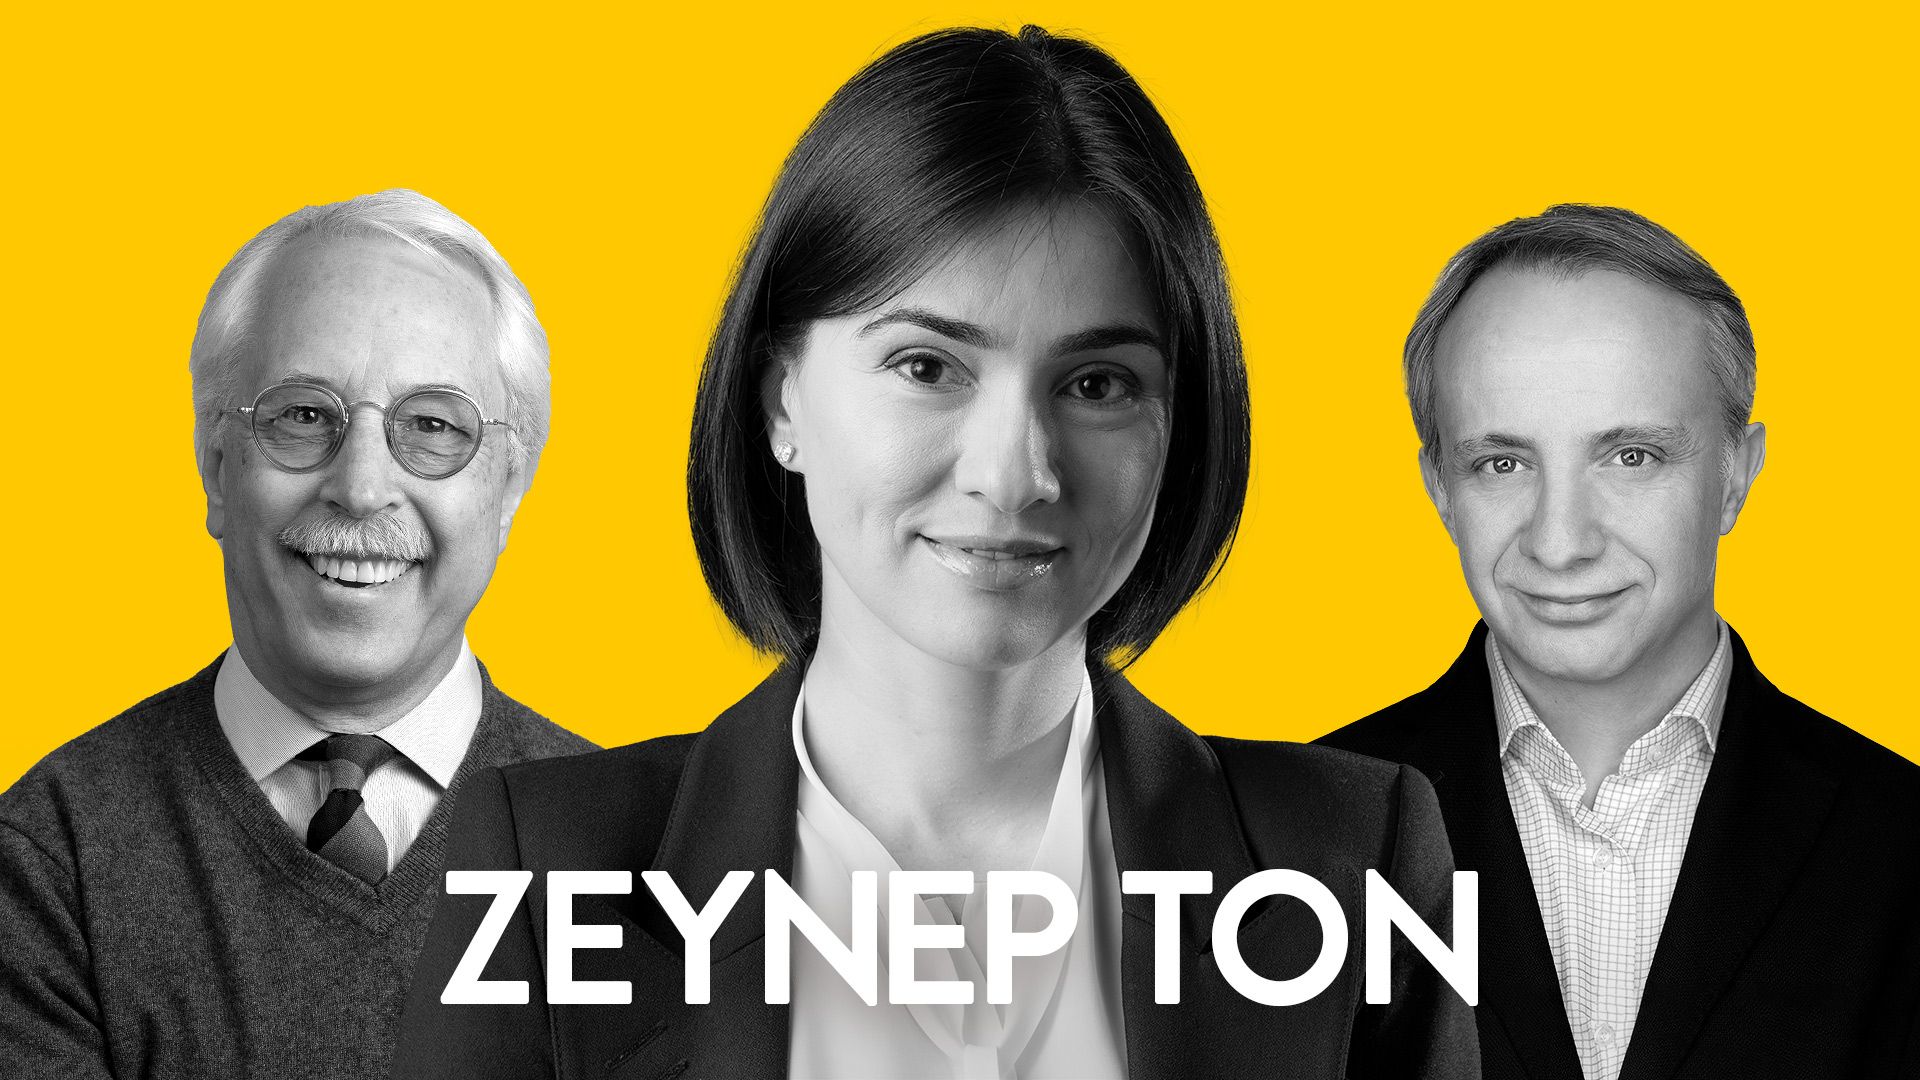 Why Good Jobs Matter with Zeynep Ton (Ep. 2)